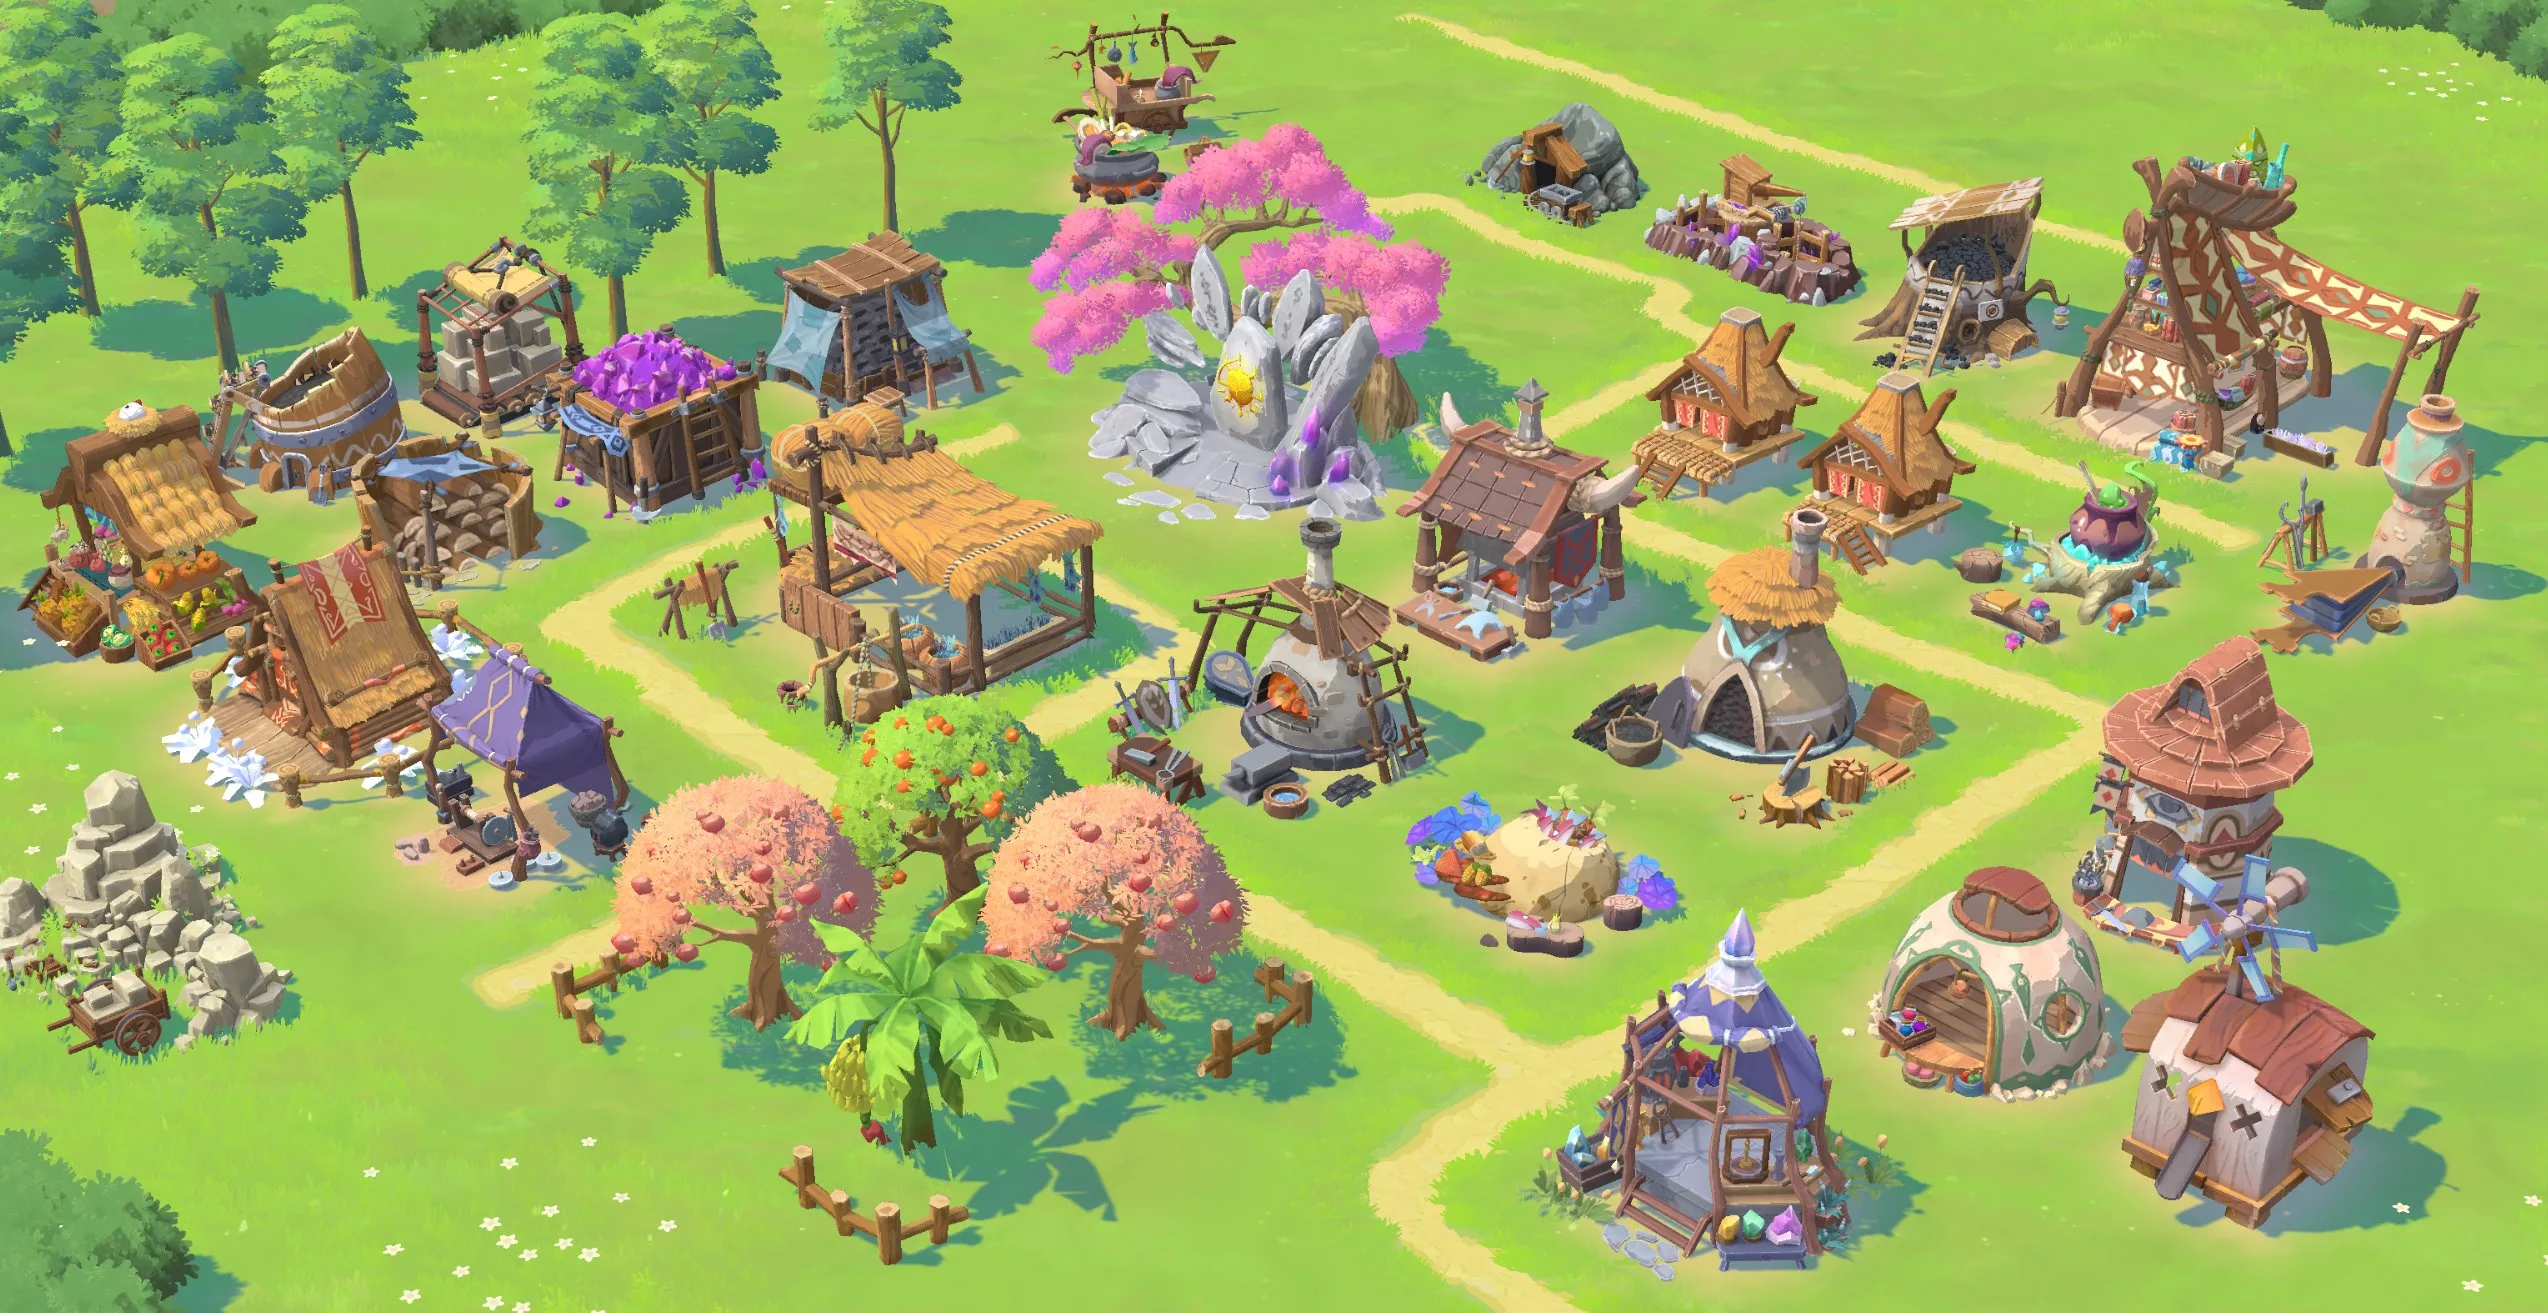 A sample of thriving plot in Axie Infinity Homeland. This land plot showcase valuable resources and a desirable location for players to explore and engage with.